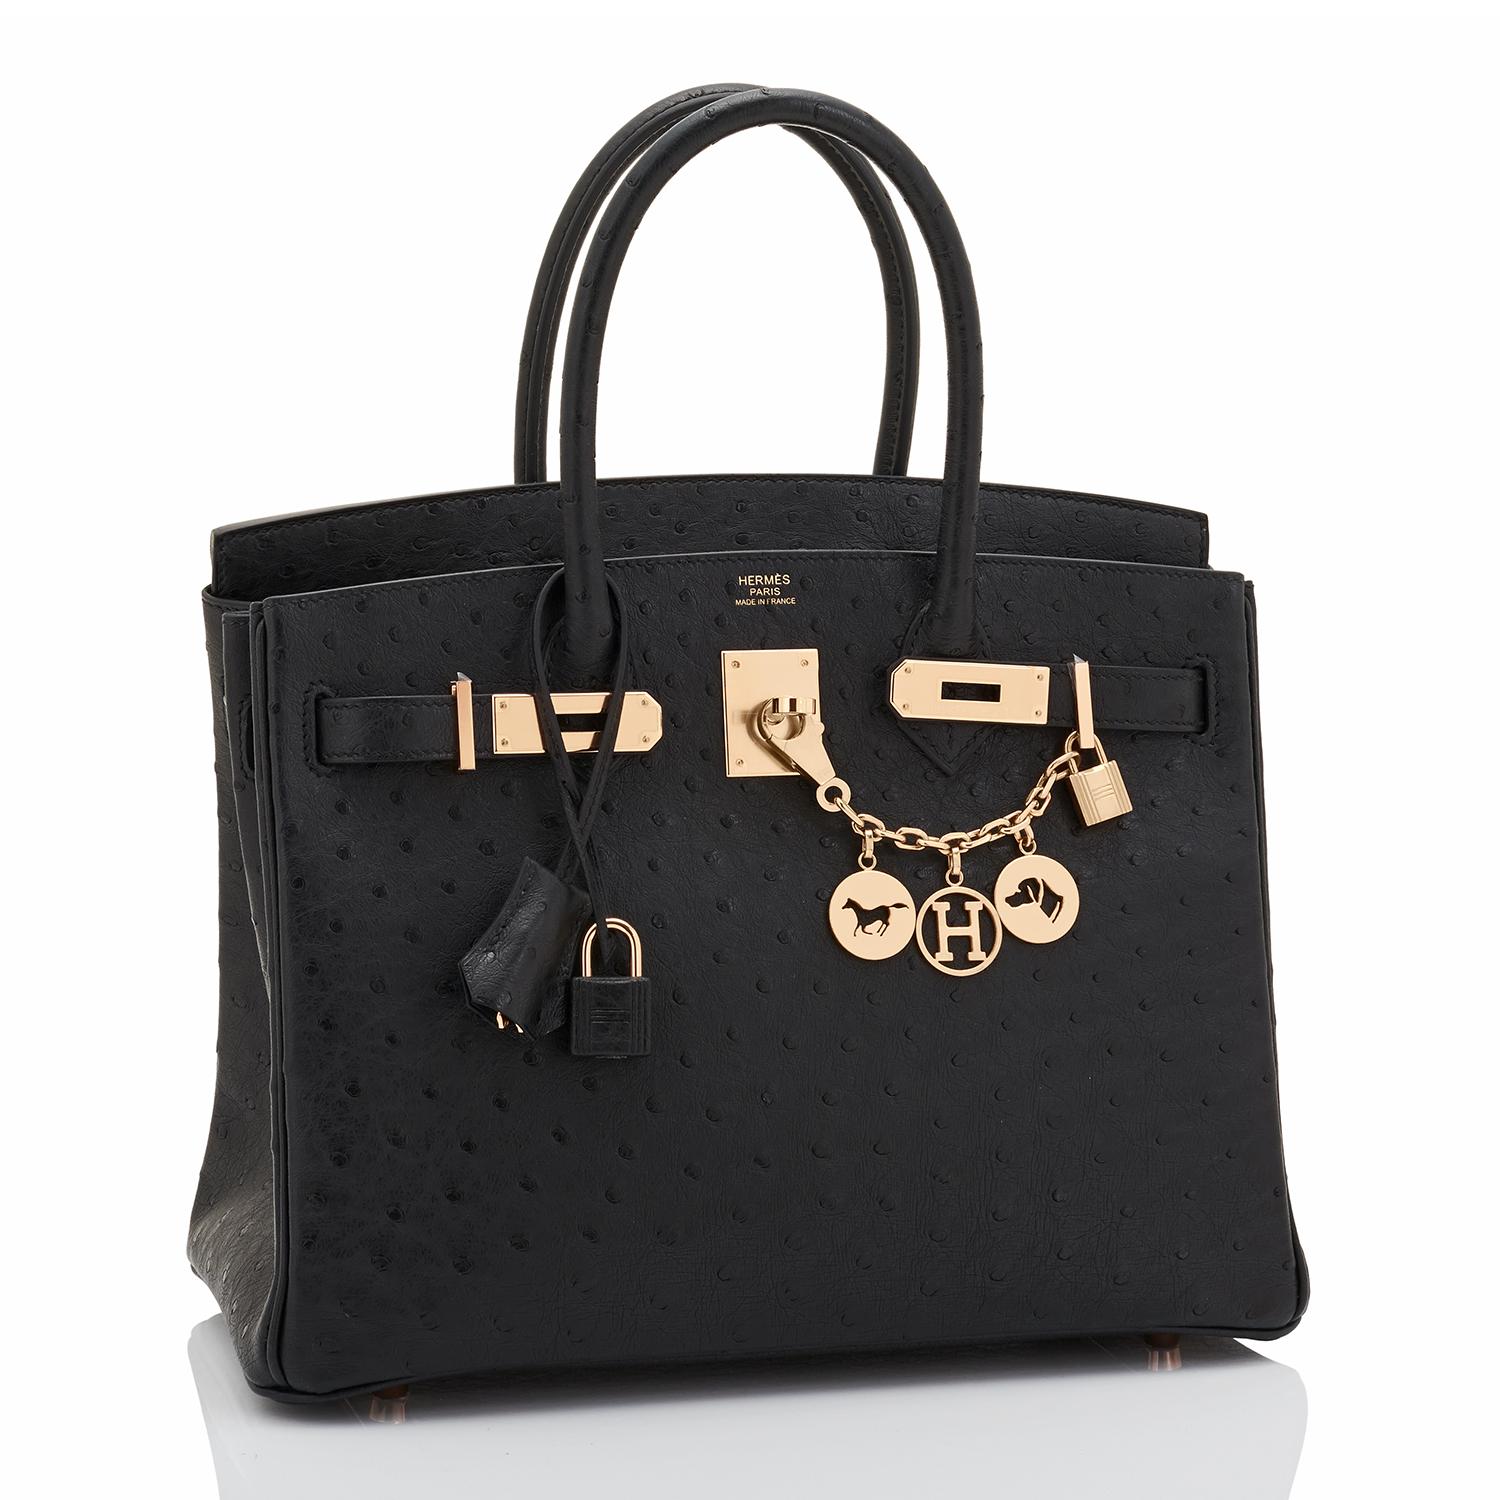 BANK WIRE PRICE ONLY!
Hermes Birkin 30cm Black Ostrich Rose Gold Hardware Bag Z Stamp, 2021 RARE
Just purchased from Hermes store; bag bears new 2021 interior Z stamp! 
Brand New in Box. Store Fresh. Pristine Condition (with plastic on